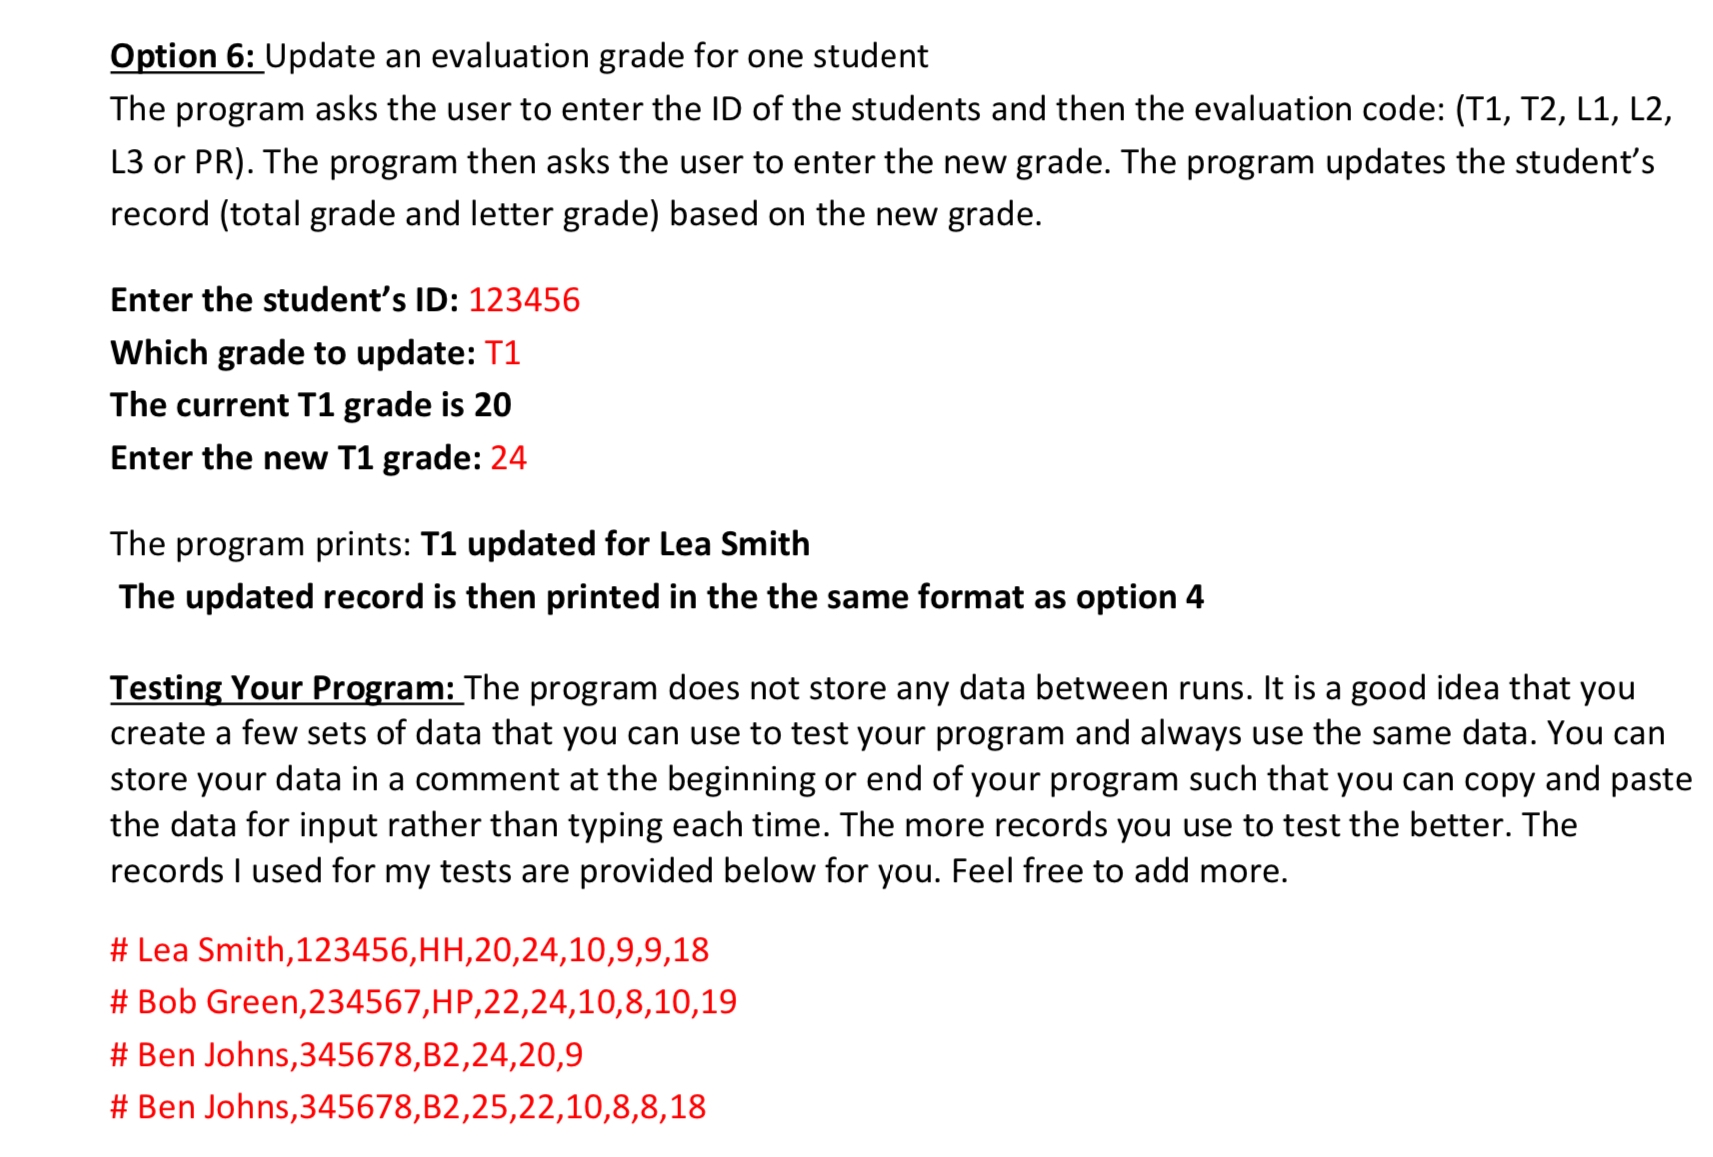 Option 6: Update an evaluation grade for one student The program asks the user to enter the ID of the student and then the evaluation code: (T1, T2, L1, L2, L3 or PR). The program then asks the user to enter the new grade. The program updates the student's record (total grade and letter grade) based on the new grade. Enter the student's ID: 123456 Which grade to update: T1 The current T1 grade is 20 Enter the new T1 grade: 24 The program prints: T1 updated for Lea Smith The updated record is then printed in the same format as option 4. Testing Your Program: The program does not store any data between runs. It is a good idea that you create a few sets of data that you can use to test your program and always use the same data. You can store your data in a comment at the beginning or end of your program such that you can copy and paste the data for input rather than typing each time. The more records you use to test, the better. The records I used for my tests are provided below for you. Feel free to add more. # Lea Smith,123456,HH,20,24,10,9,9,18 # Bob Green,234567,HP,22,24,10,8,10,19 # Ben Johns,345678,B2,24,20,9 # Ben Johns,345678,B2,25,22,10,8,8,18